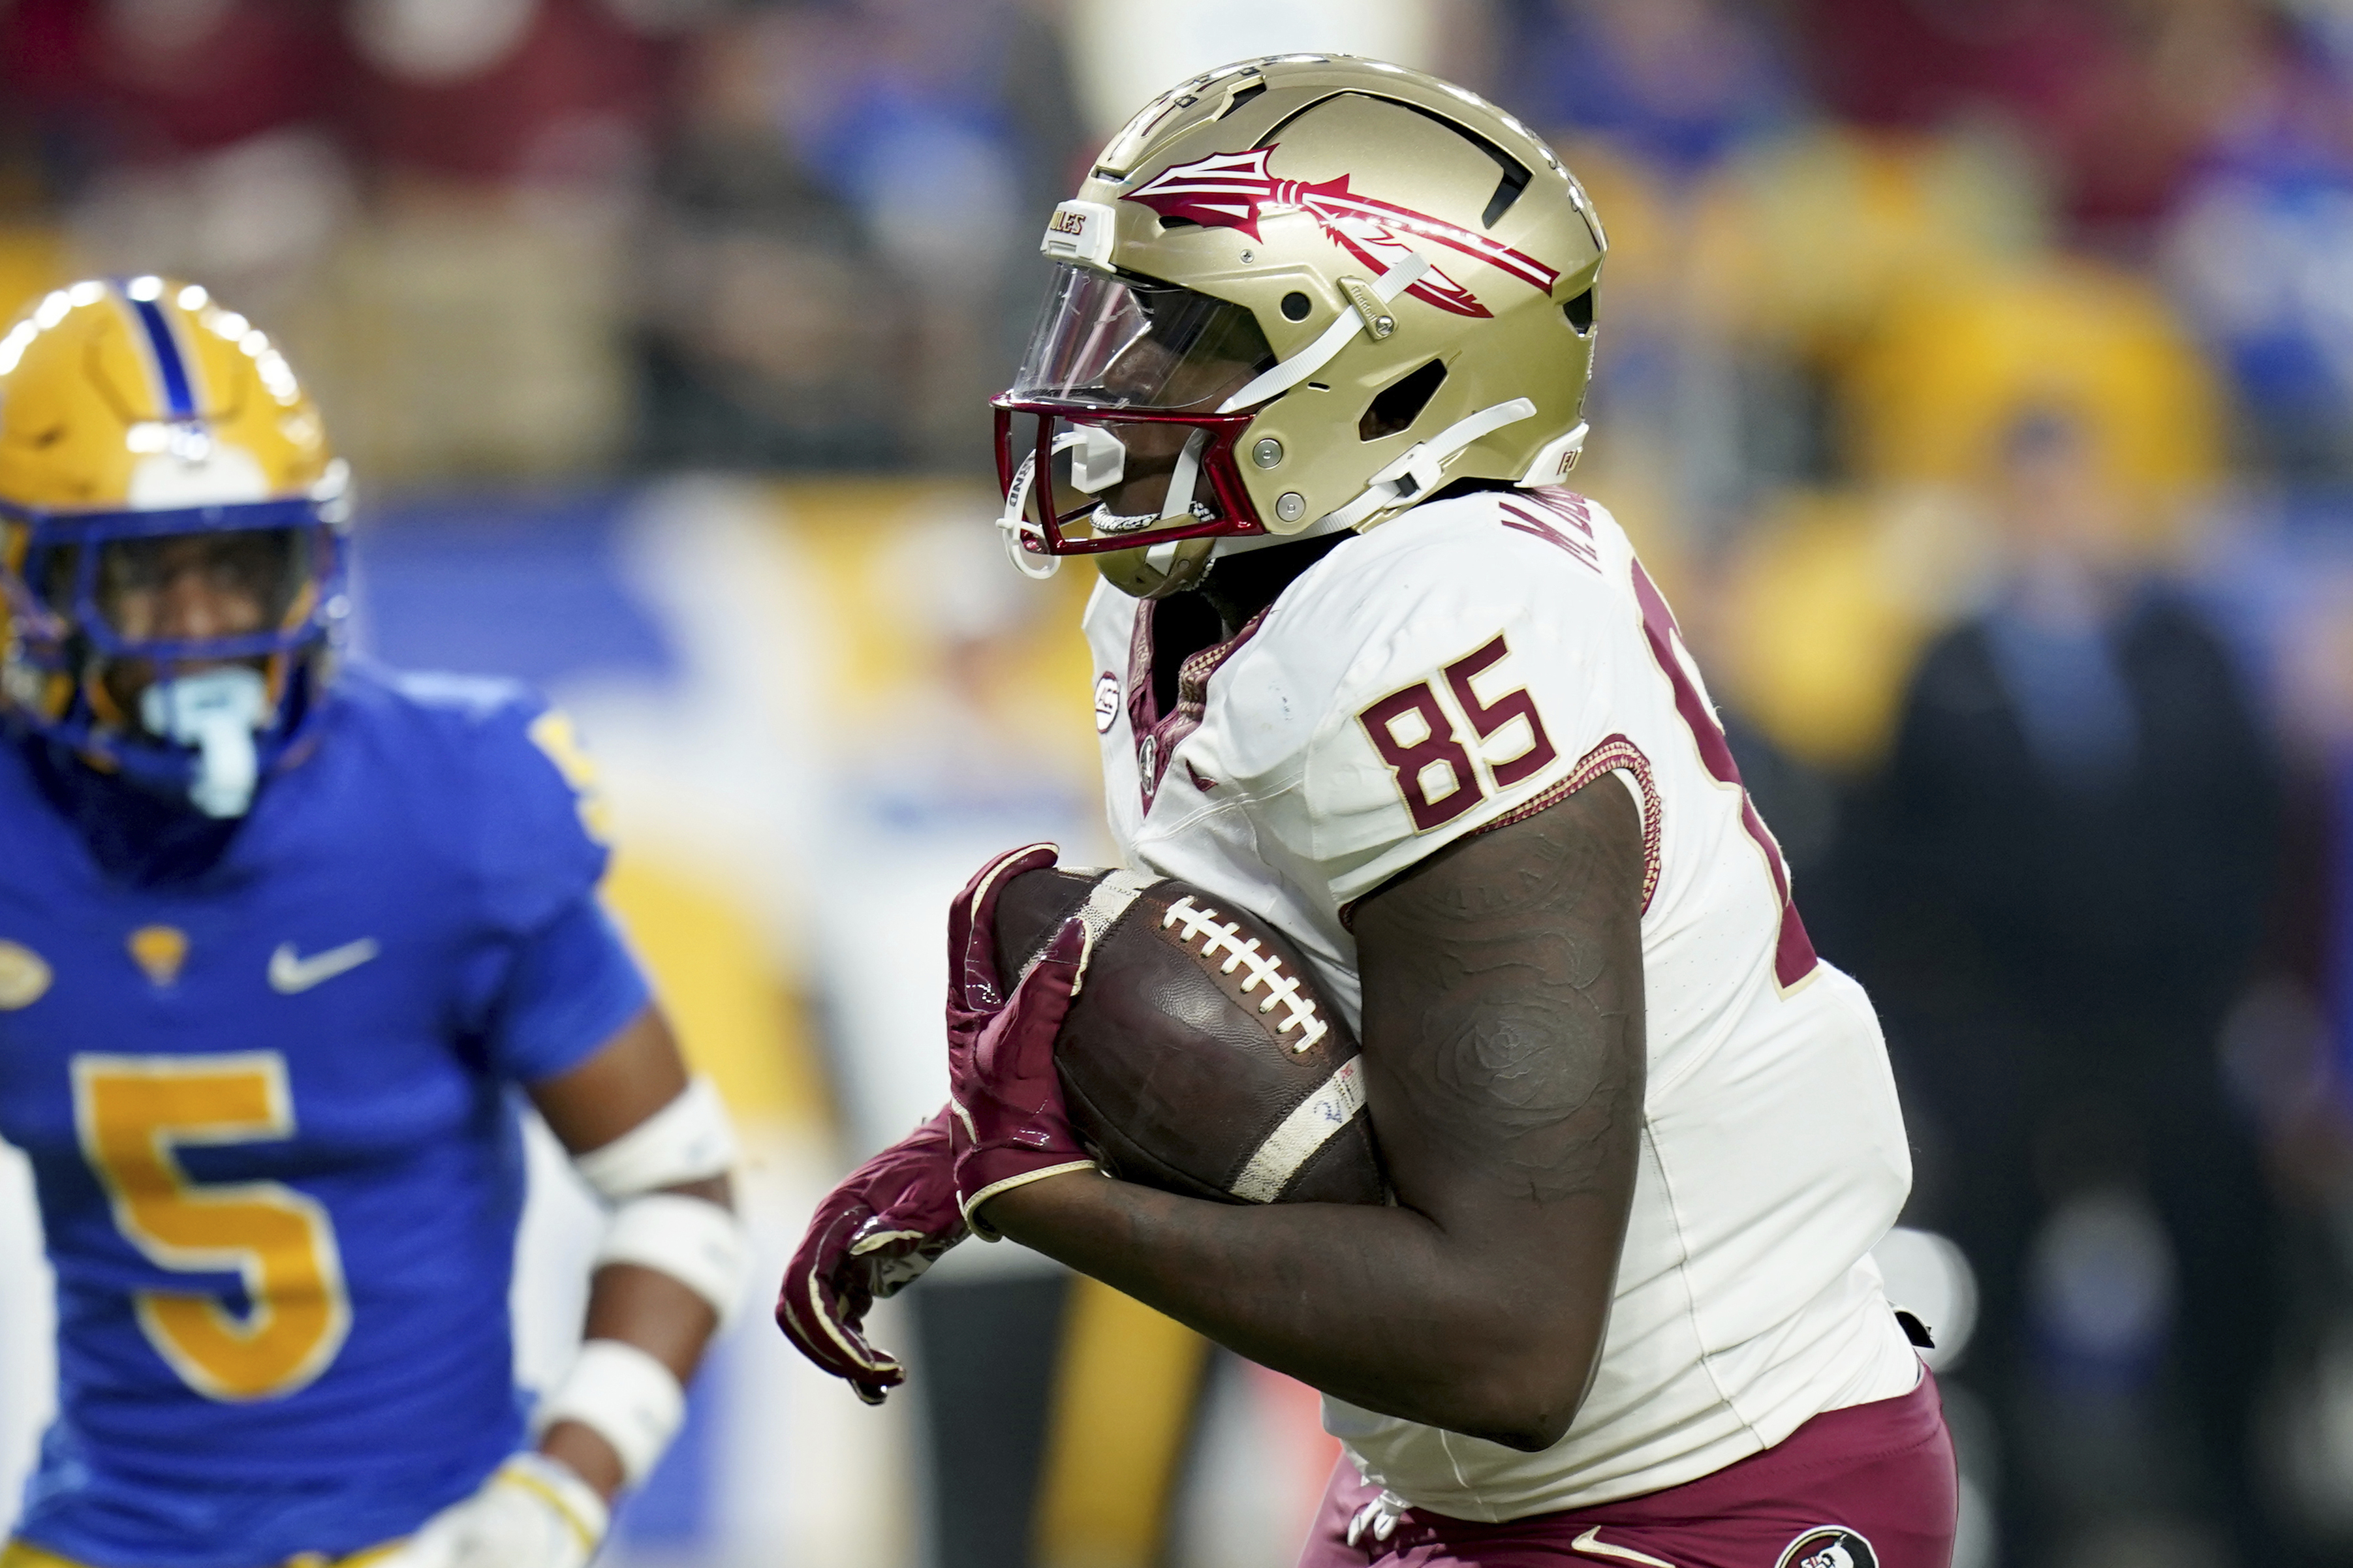 FSU handles business, clinches spot in ACC Championship ahead of